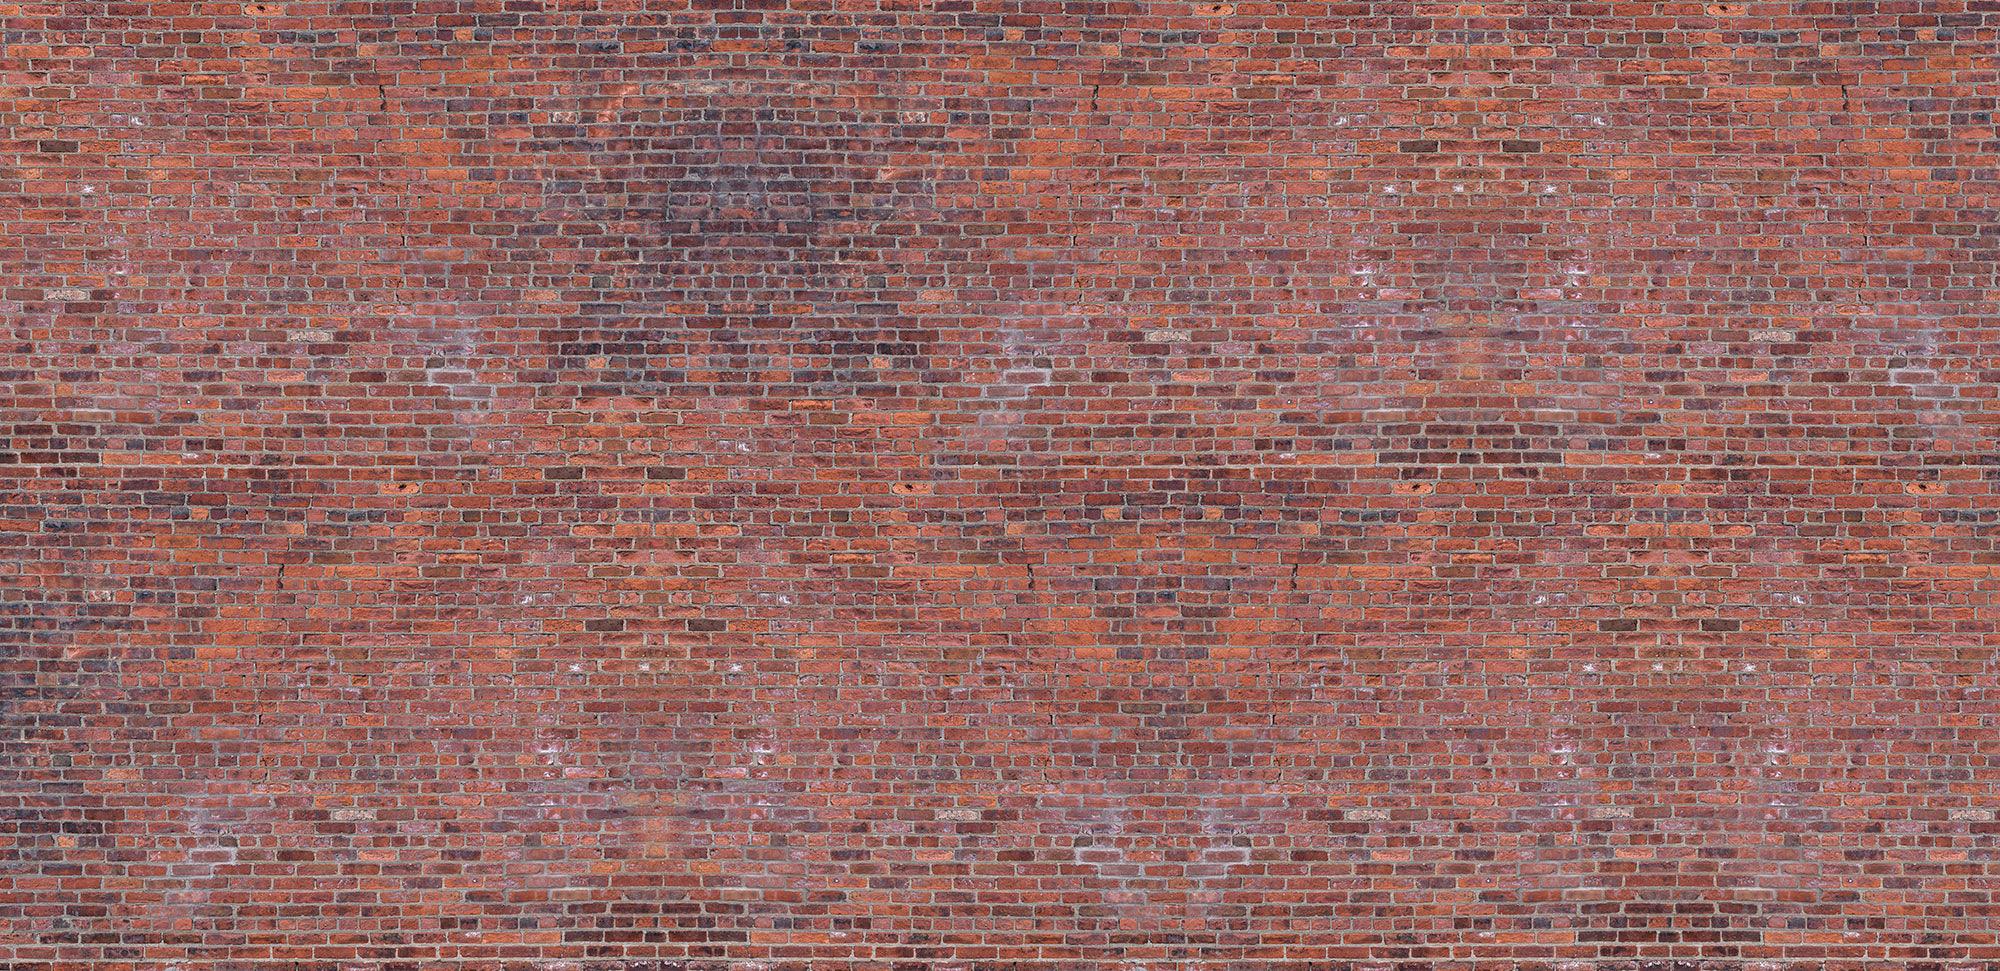 CoolWalls.ca Background Weathered Red Brick wall GigaPixel image